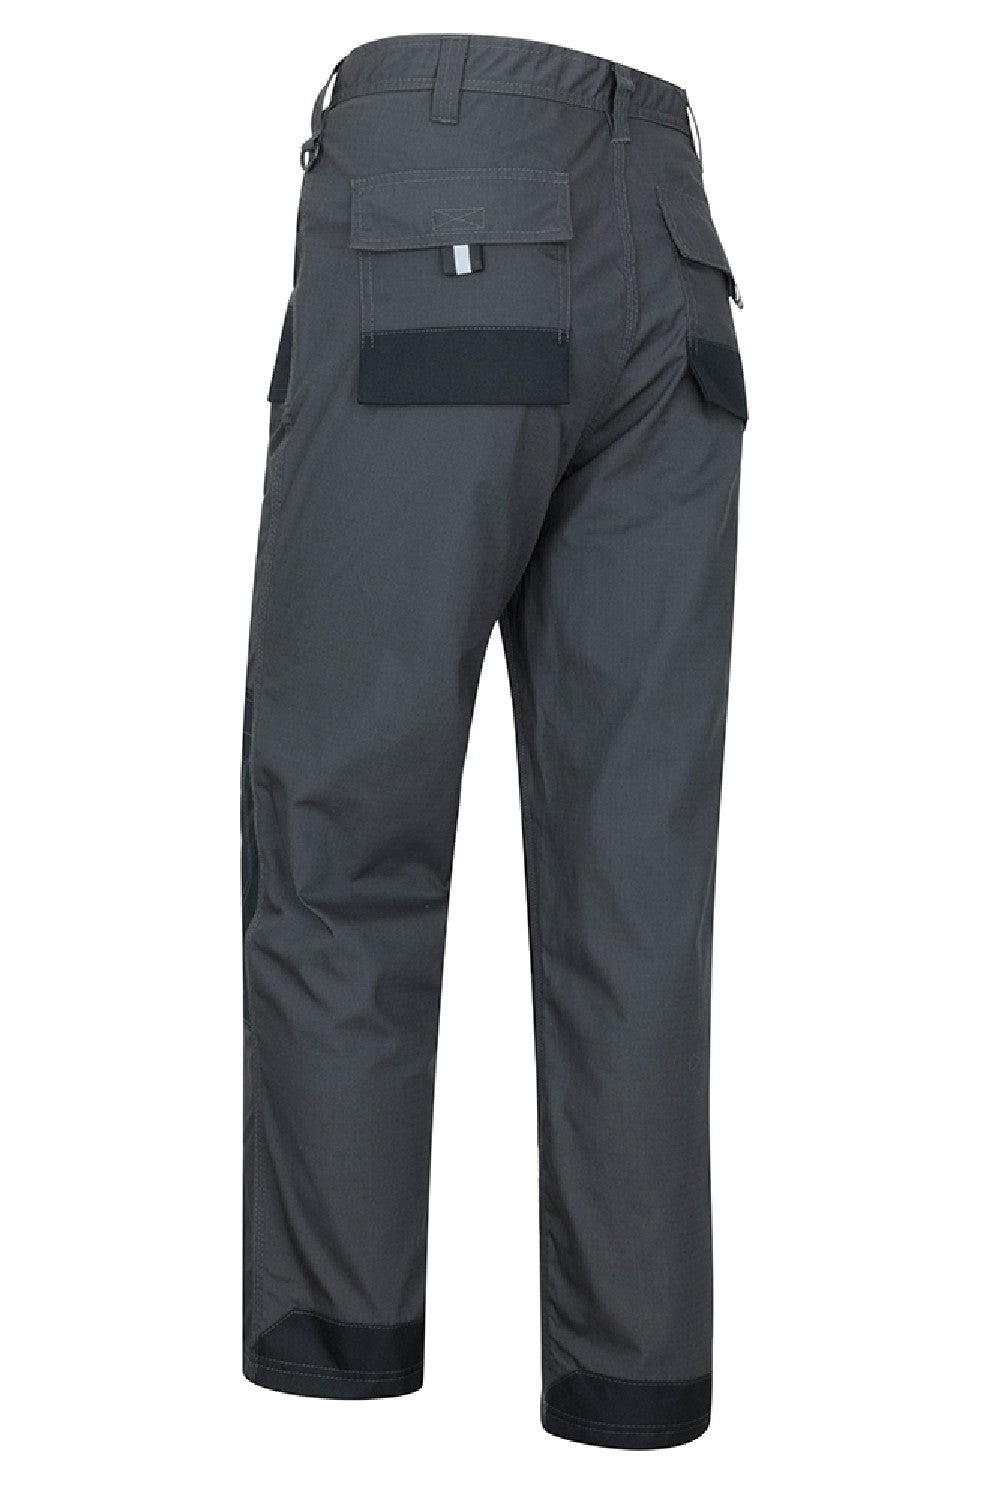 Hoggs of Fife Granite II Utility Unlined Trousers | Cluny Country